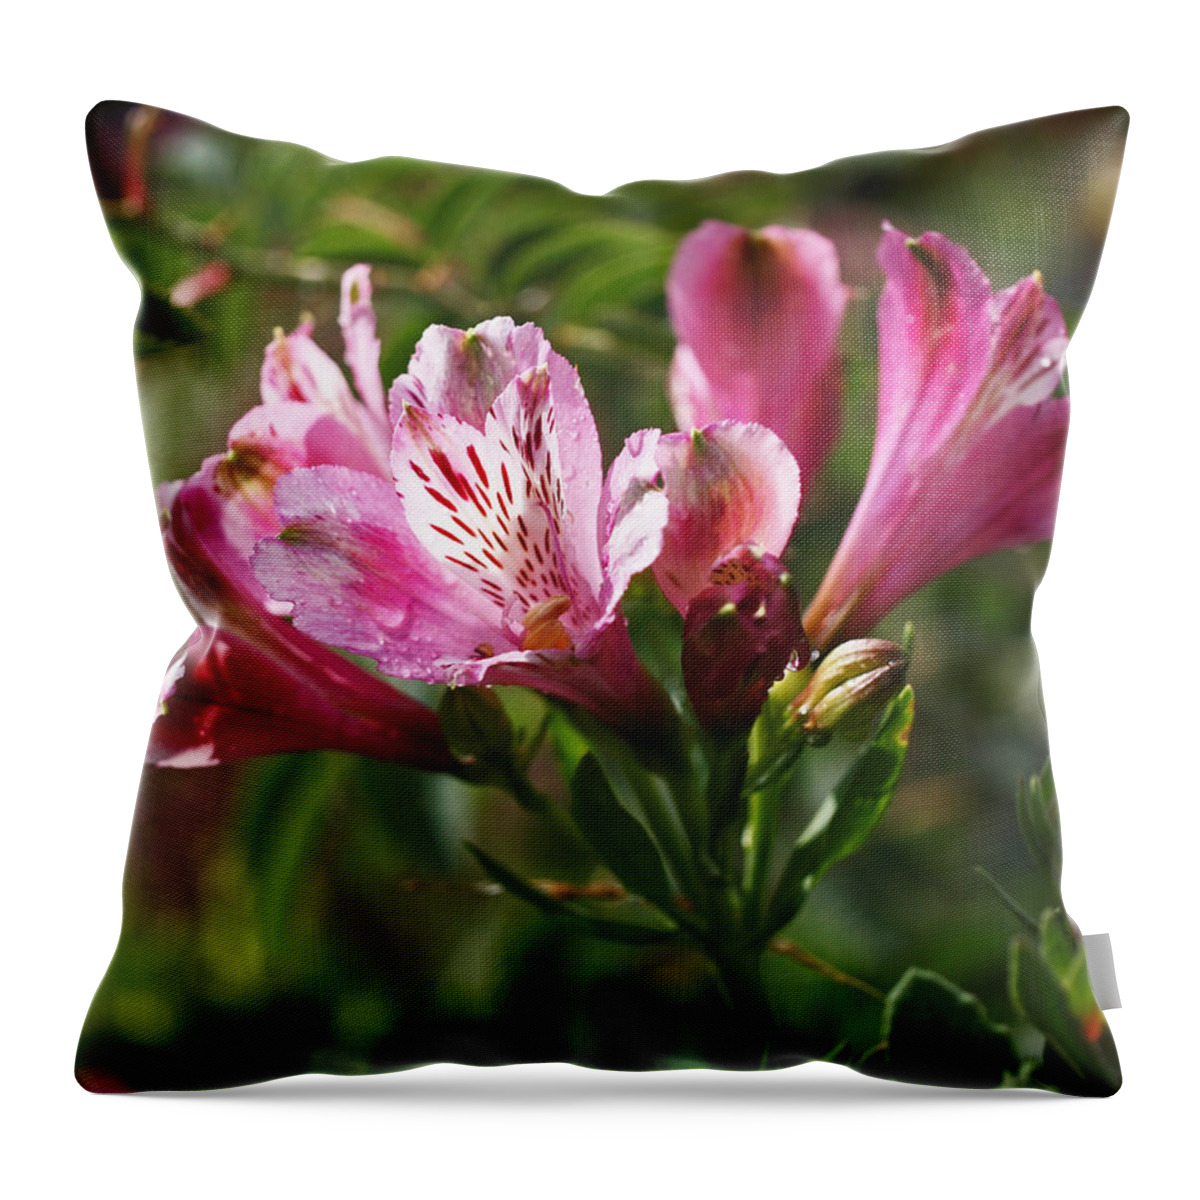 Pink Throw Pillow featuring the photograph Alstroemeria by Rona Black